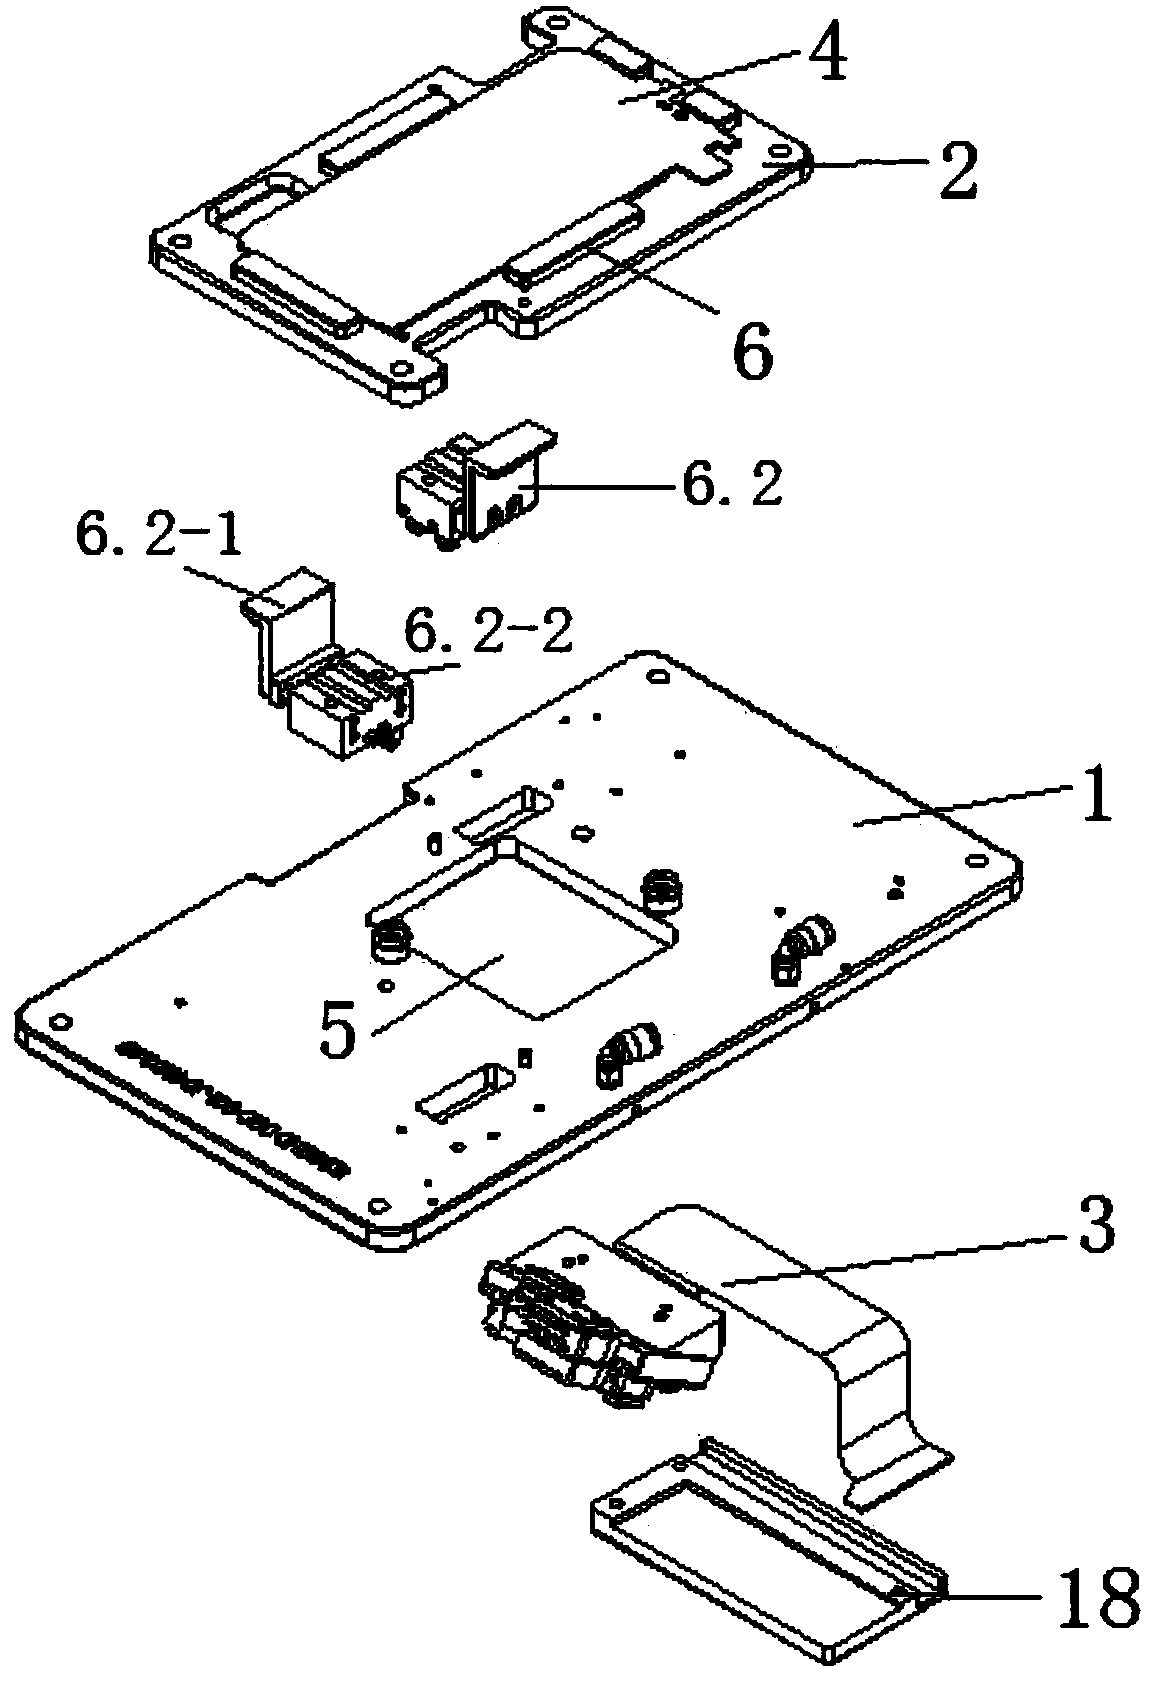 Press-connecting carrier for automatically turning testing jig